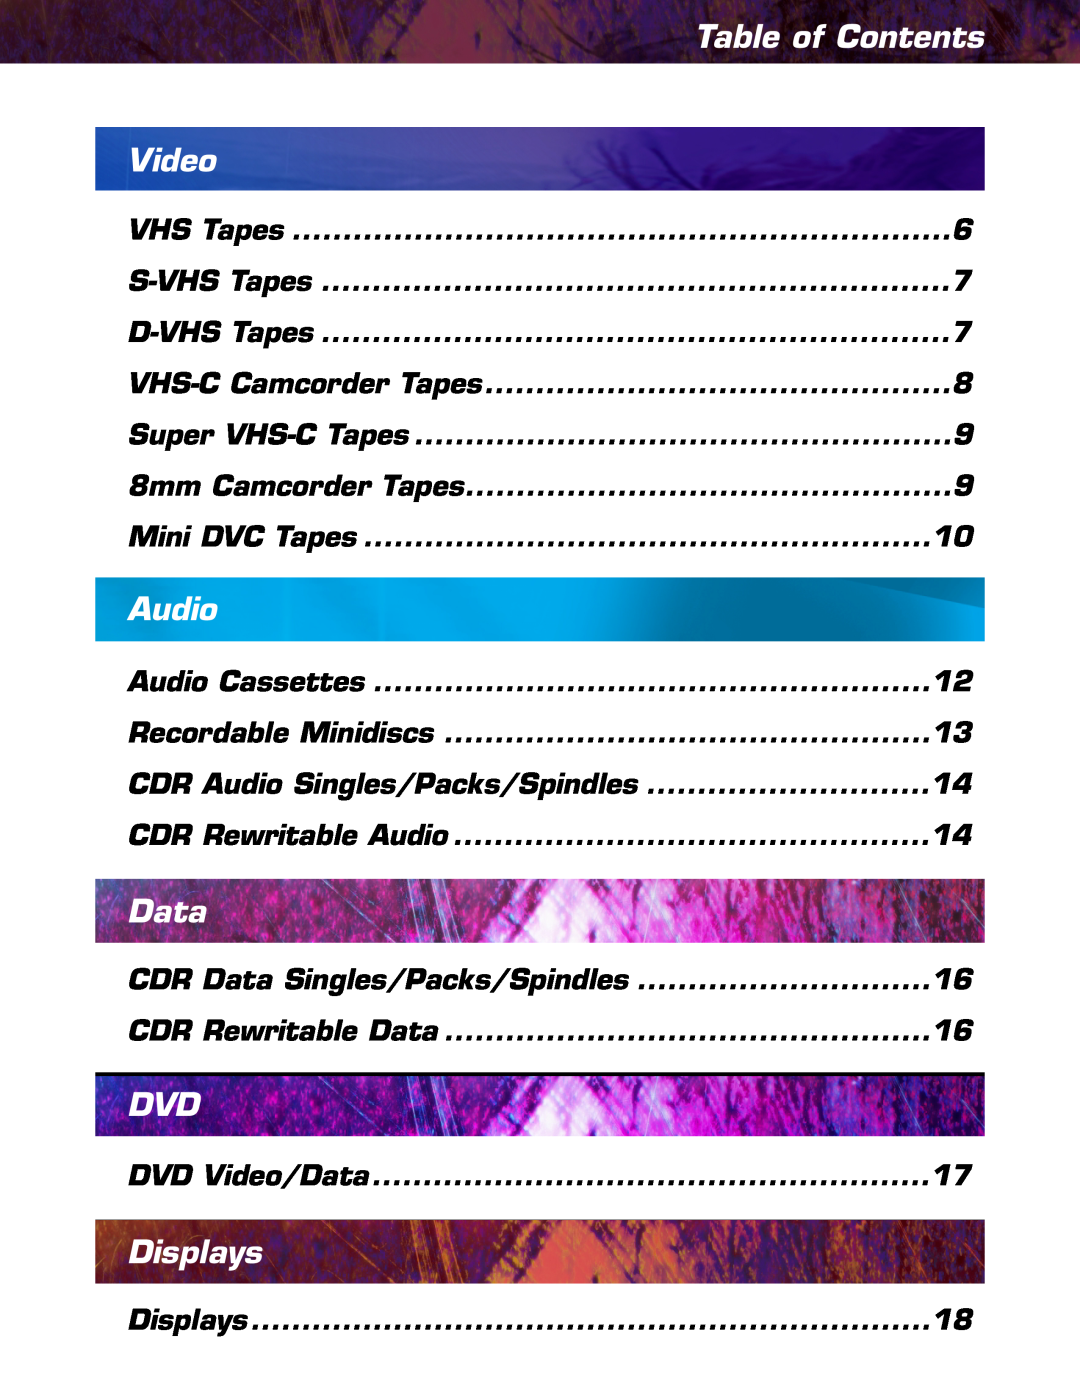 JVC TC35KL3P manual Table of Contents, Video, Audio, Data, Displays 